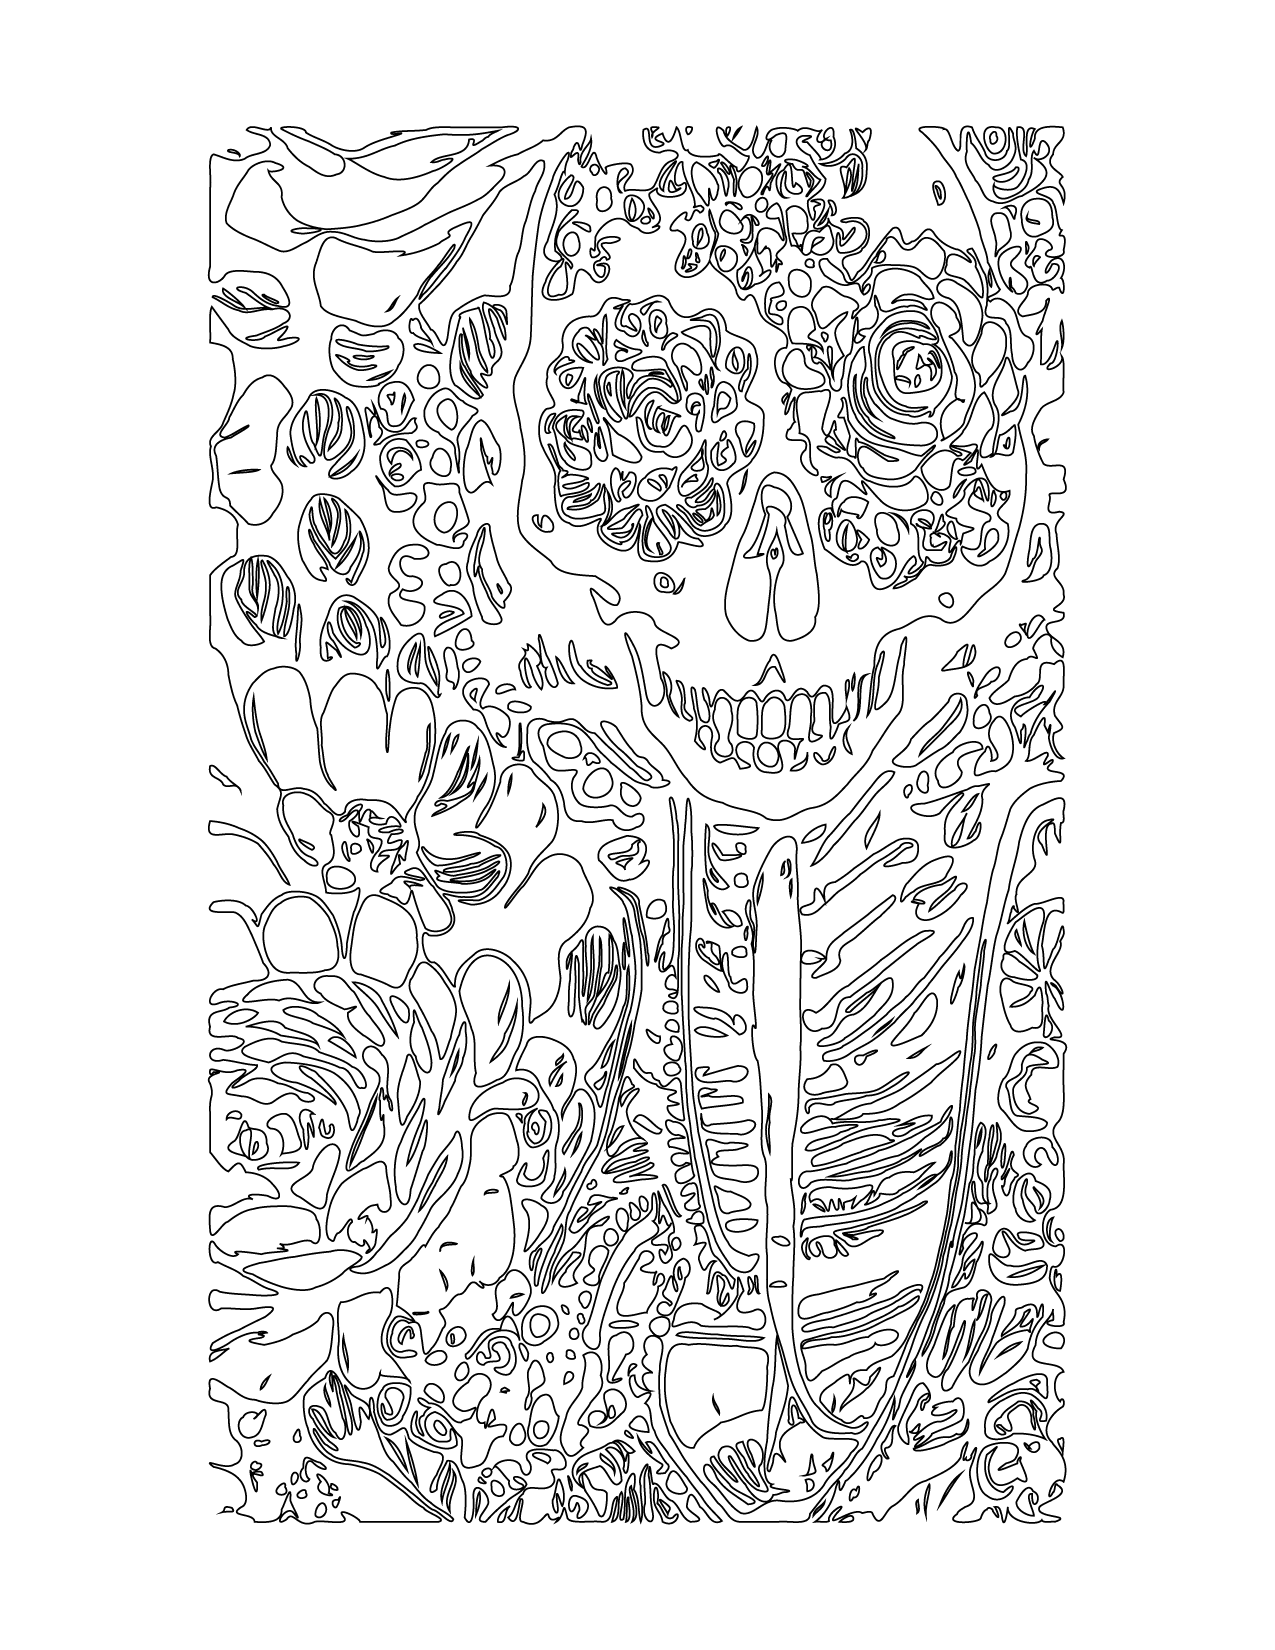 Skeleton With Flowers Coloring Page